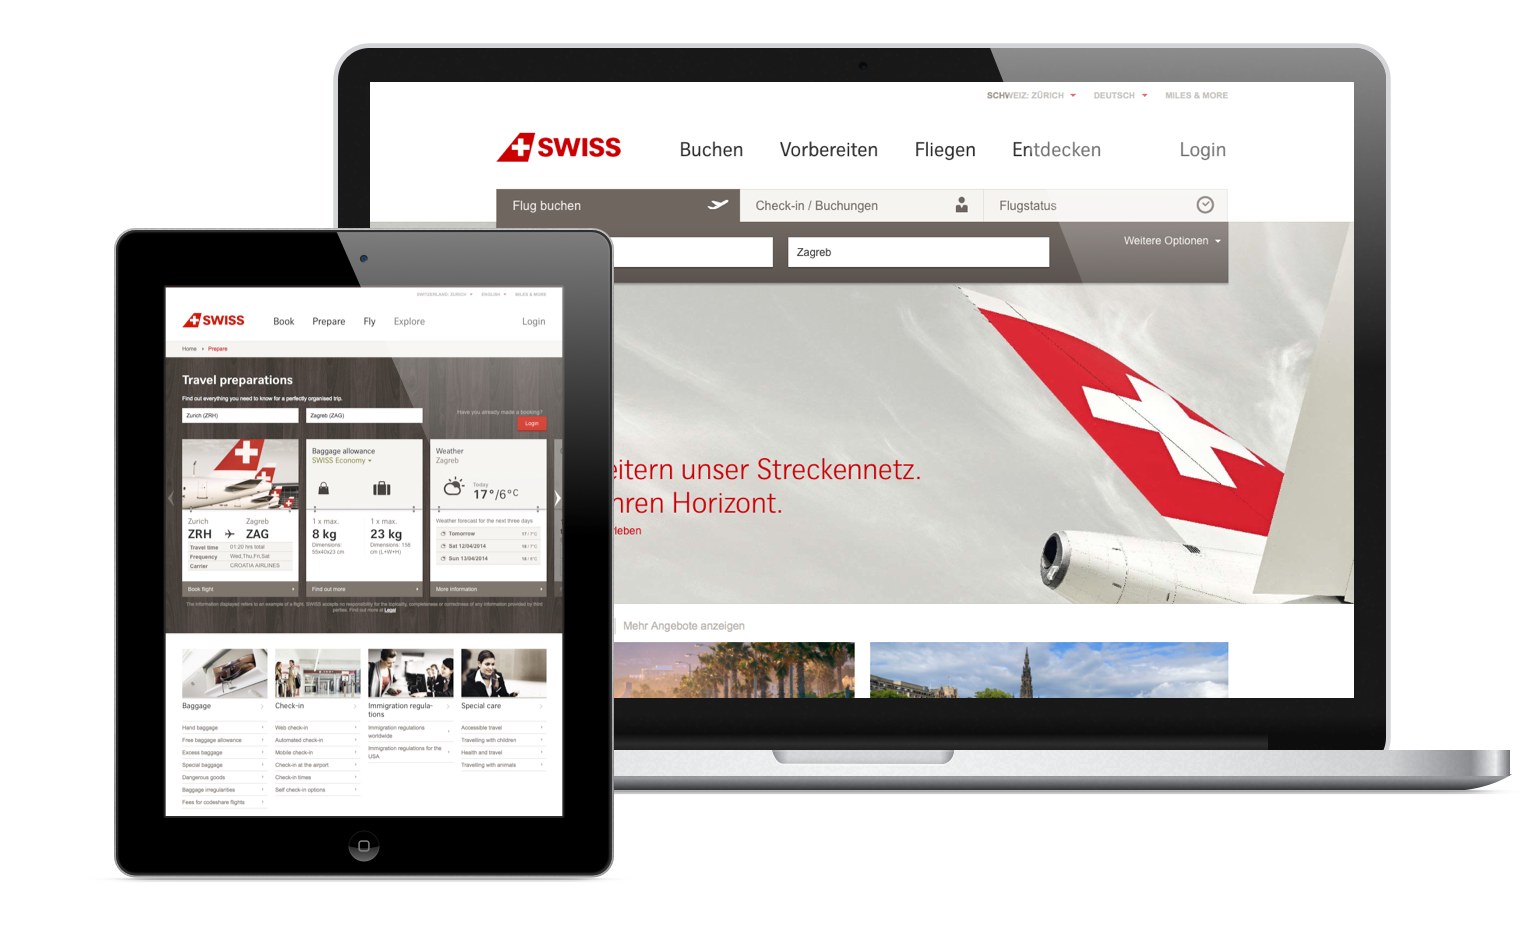 Screenshots of the Swiss.com website on different devices showcasing the responsive design